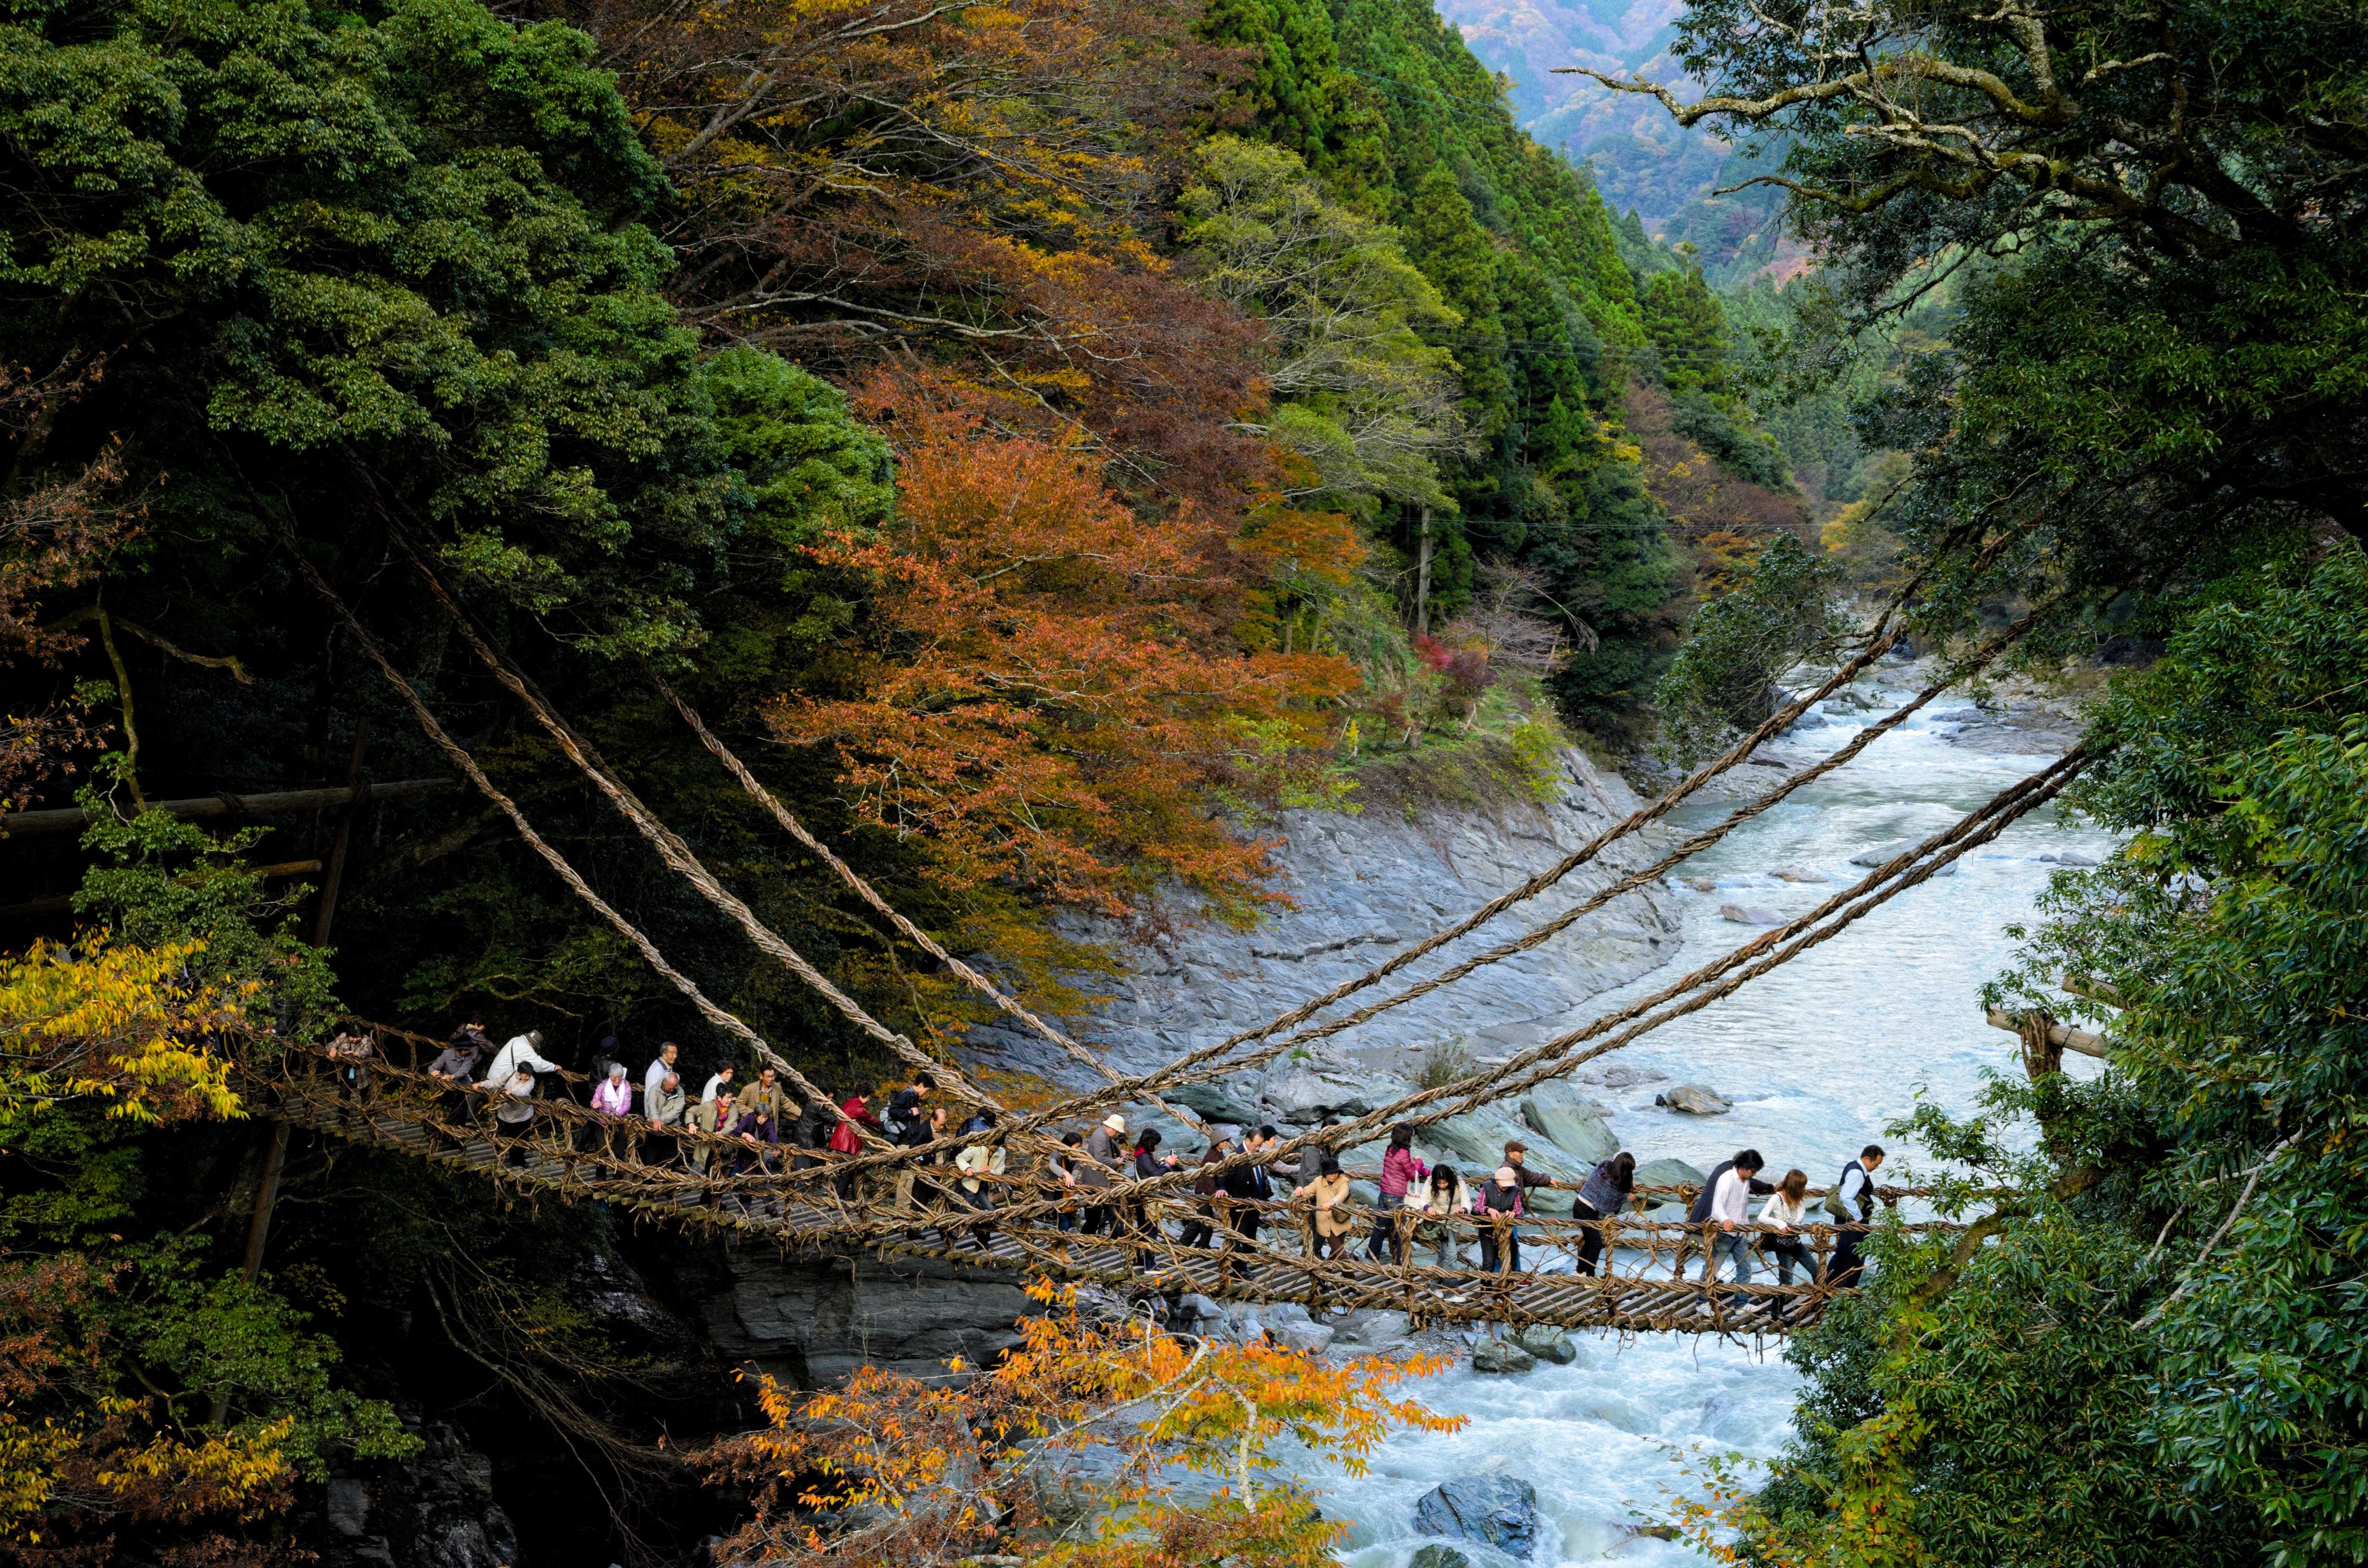 Crossing the few remaining suspended vine bridges in Lya Valley is a breathtaking experience. Photos: Alamy